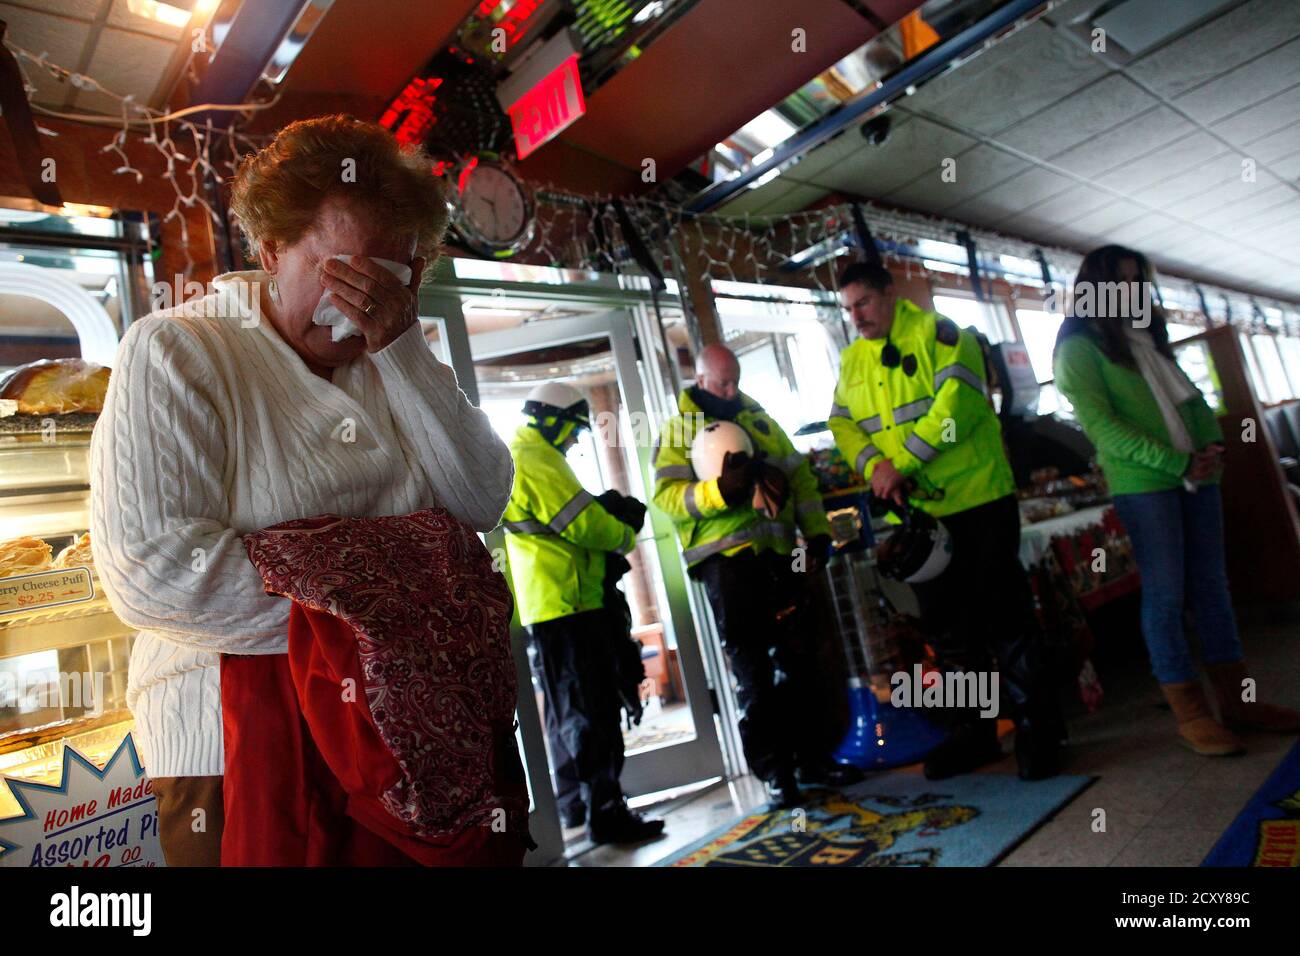 People at the Blue Colony diner observe a moment of silence for victims of the December 14 shootings at Sandy Hook Elementary school in Newtown, Connecticut, December 21, 2012. REUTERS/Eric Thayer (UNITED STATES - Tags: CRIME LAW EDUCATION) Stock Photo